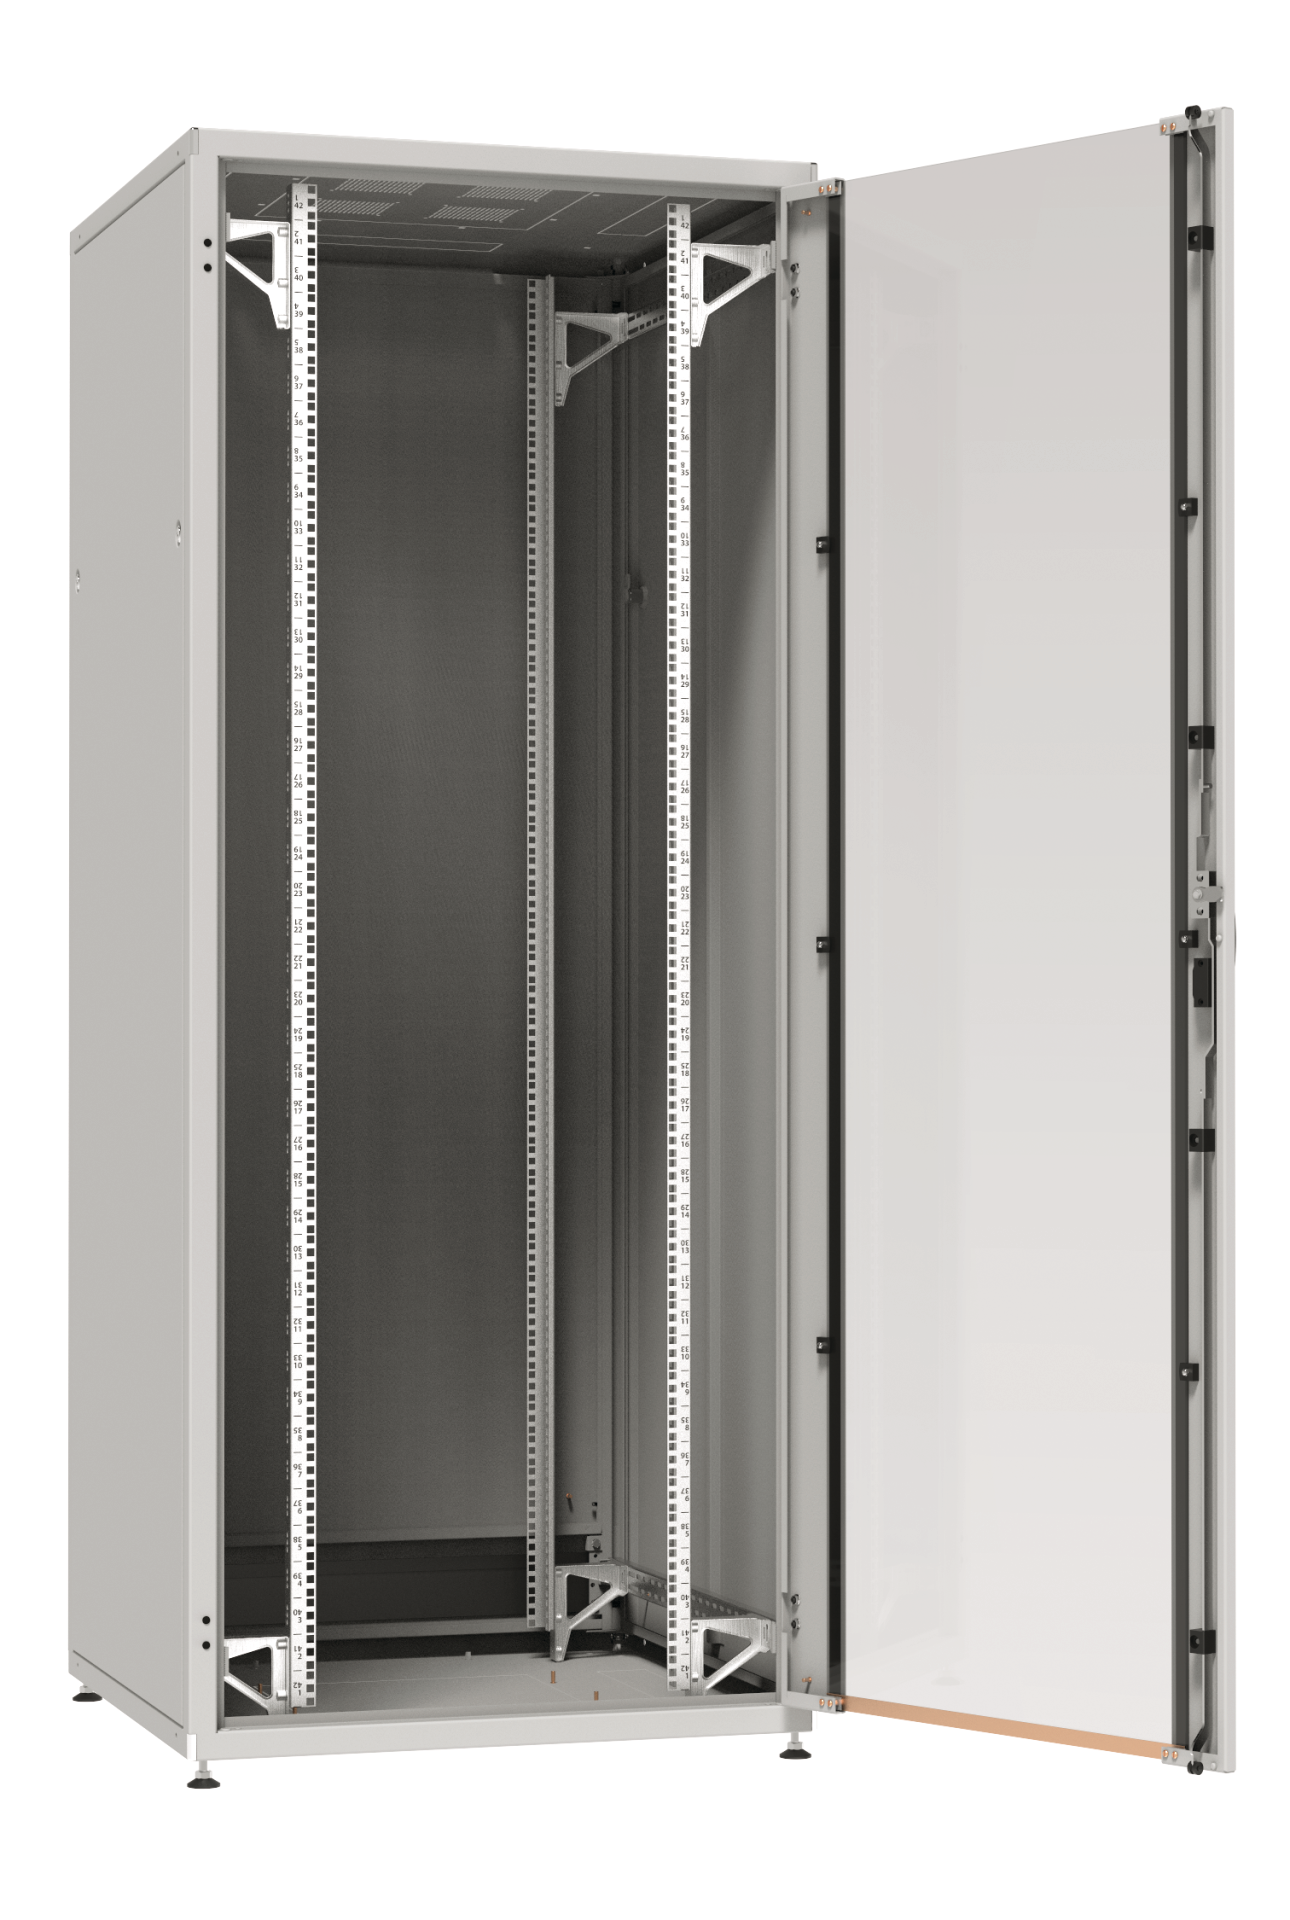 19" Network Cabinet PRO 42U, 800x1000 mm, RAL7035, Rear Door with Turning Handle